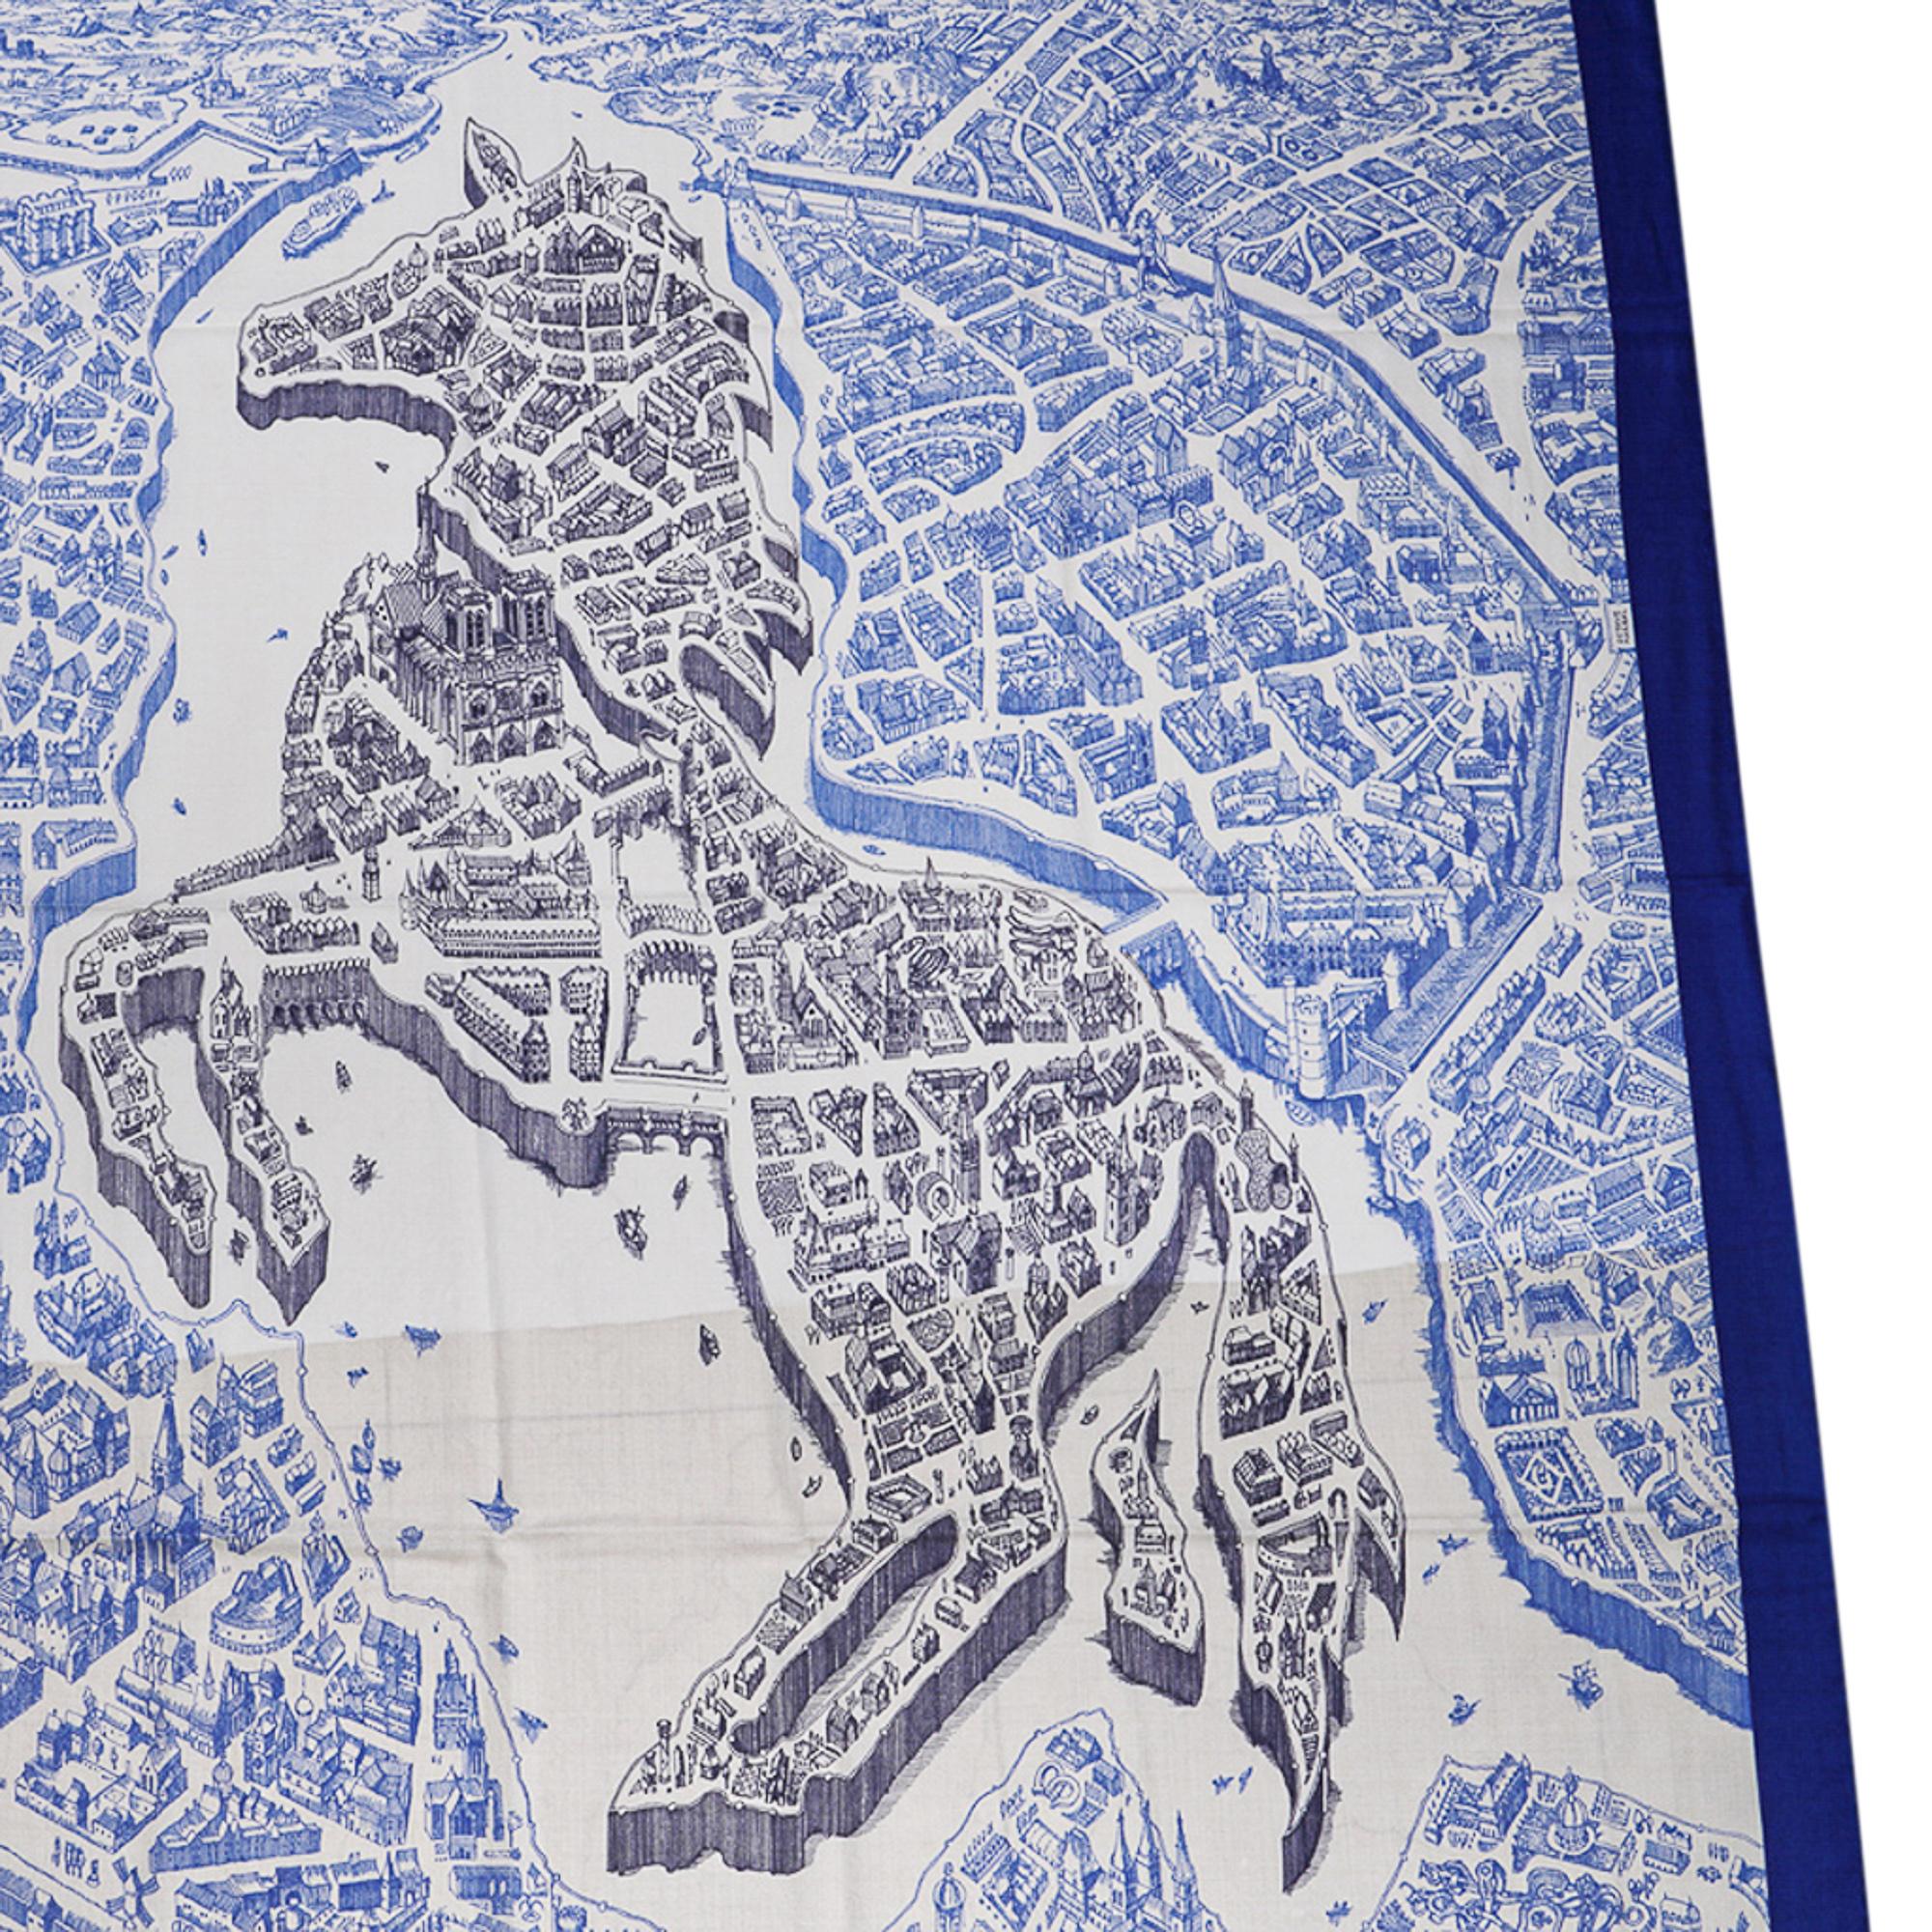 Hermes La Cite Cavaliere Cashmere and Silk scarf by Octave Marsal.
Depicts a bird's eye view of Paris with the horse at its heart!
Exquisite in Bleu Royal, Blanc and Bleu Encre.
Signature hand rolled edge.
Comes with signature Hermes Box and